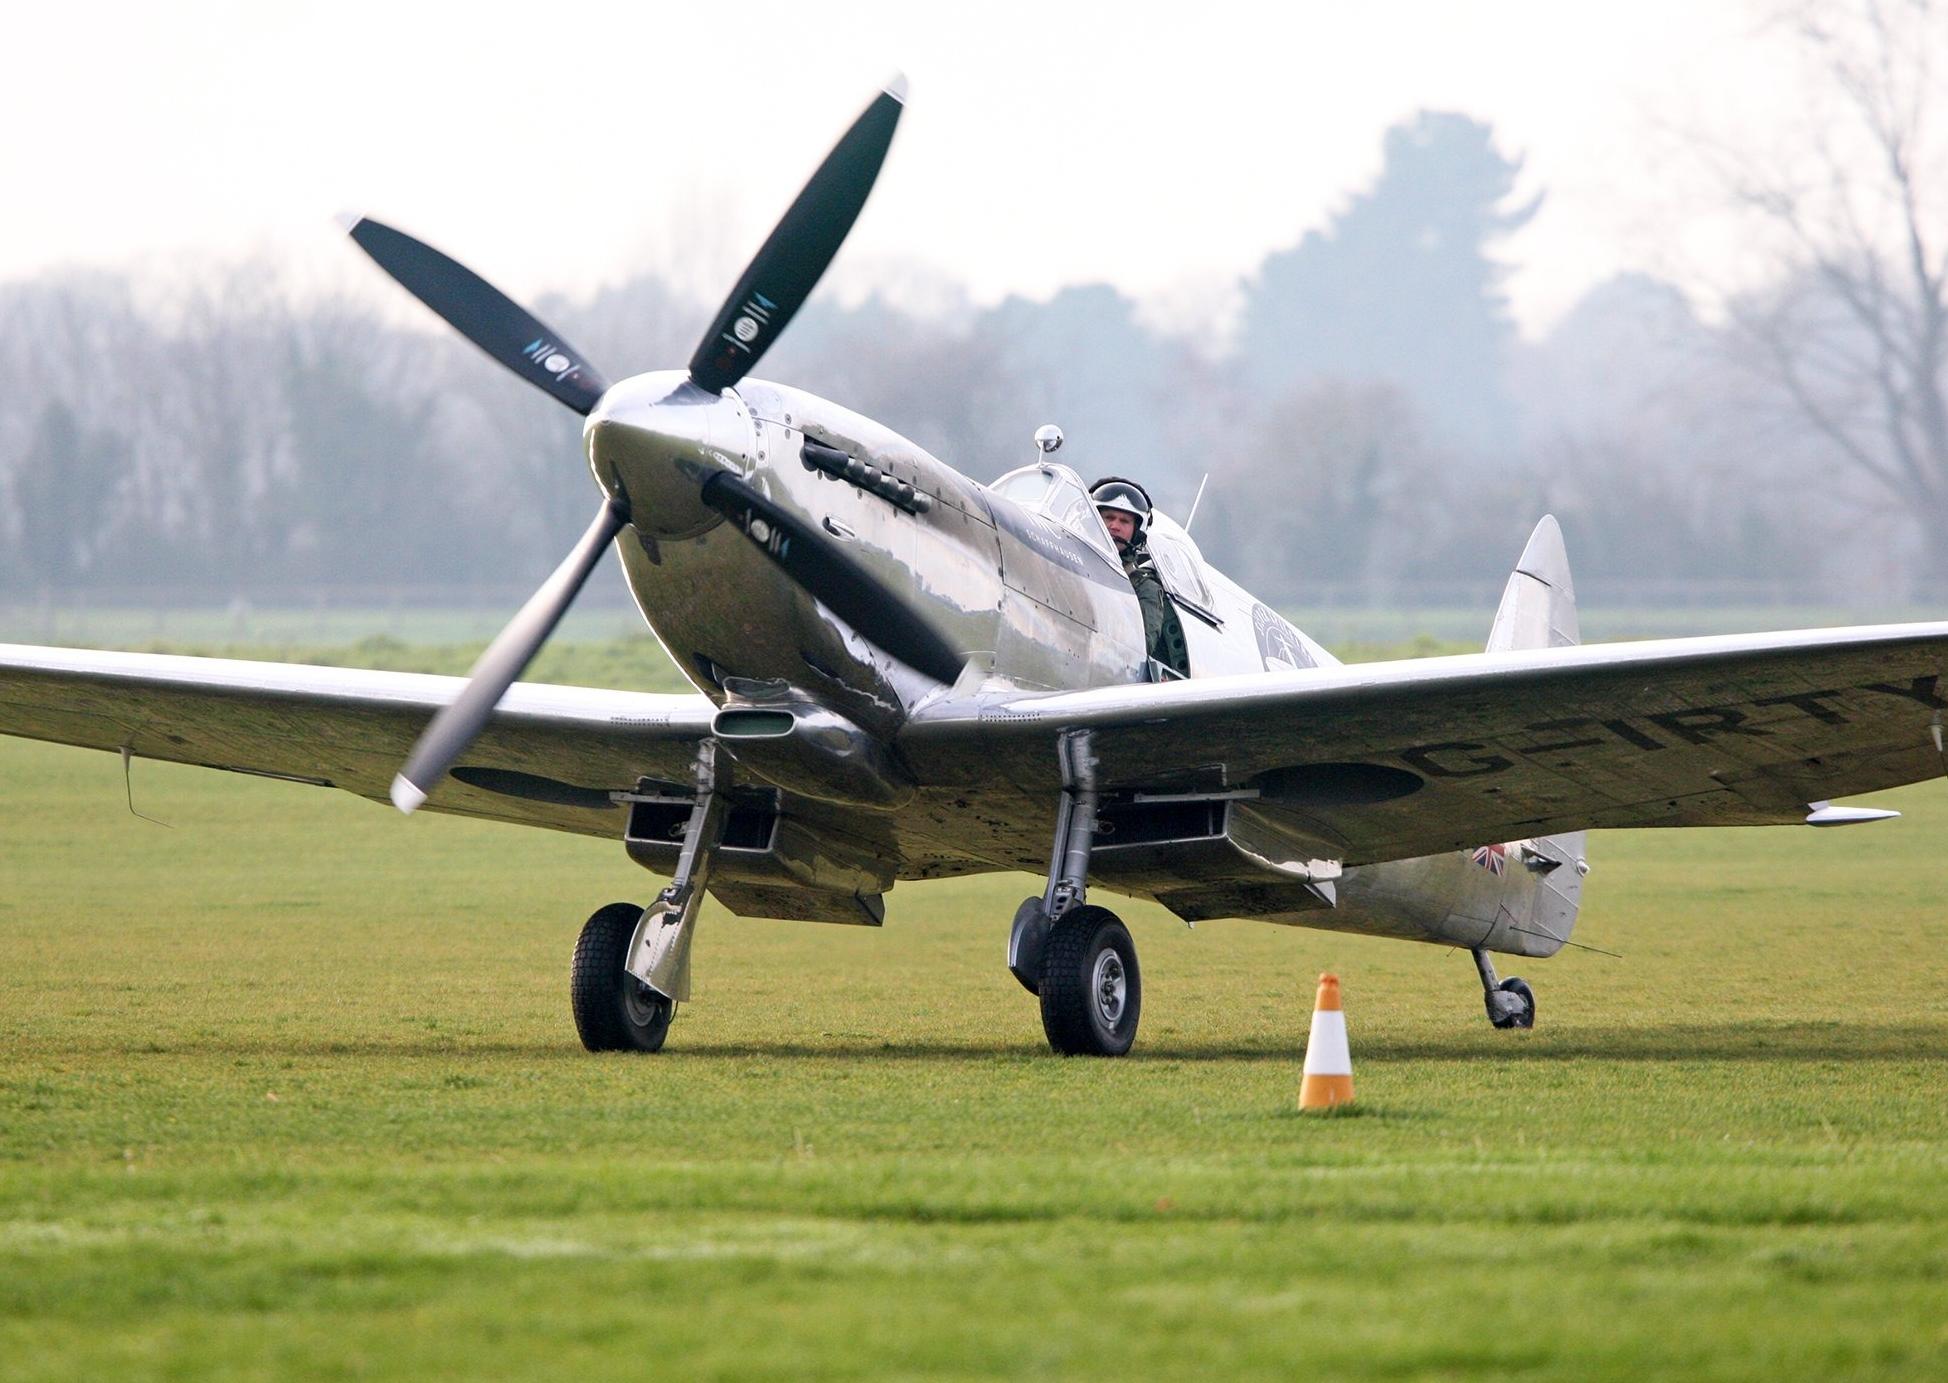 DM19121043a.jpg. A newly-restored spitfire aircraft lands at Goodwood following a 27,000 mile journey around the world. Photo by Derek Martin Photography. SUS-190512-171006008